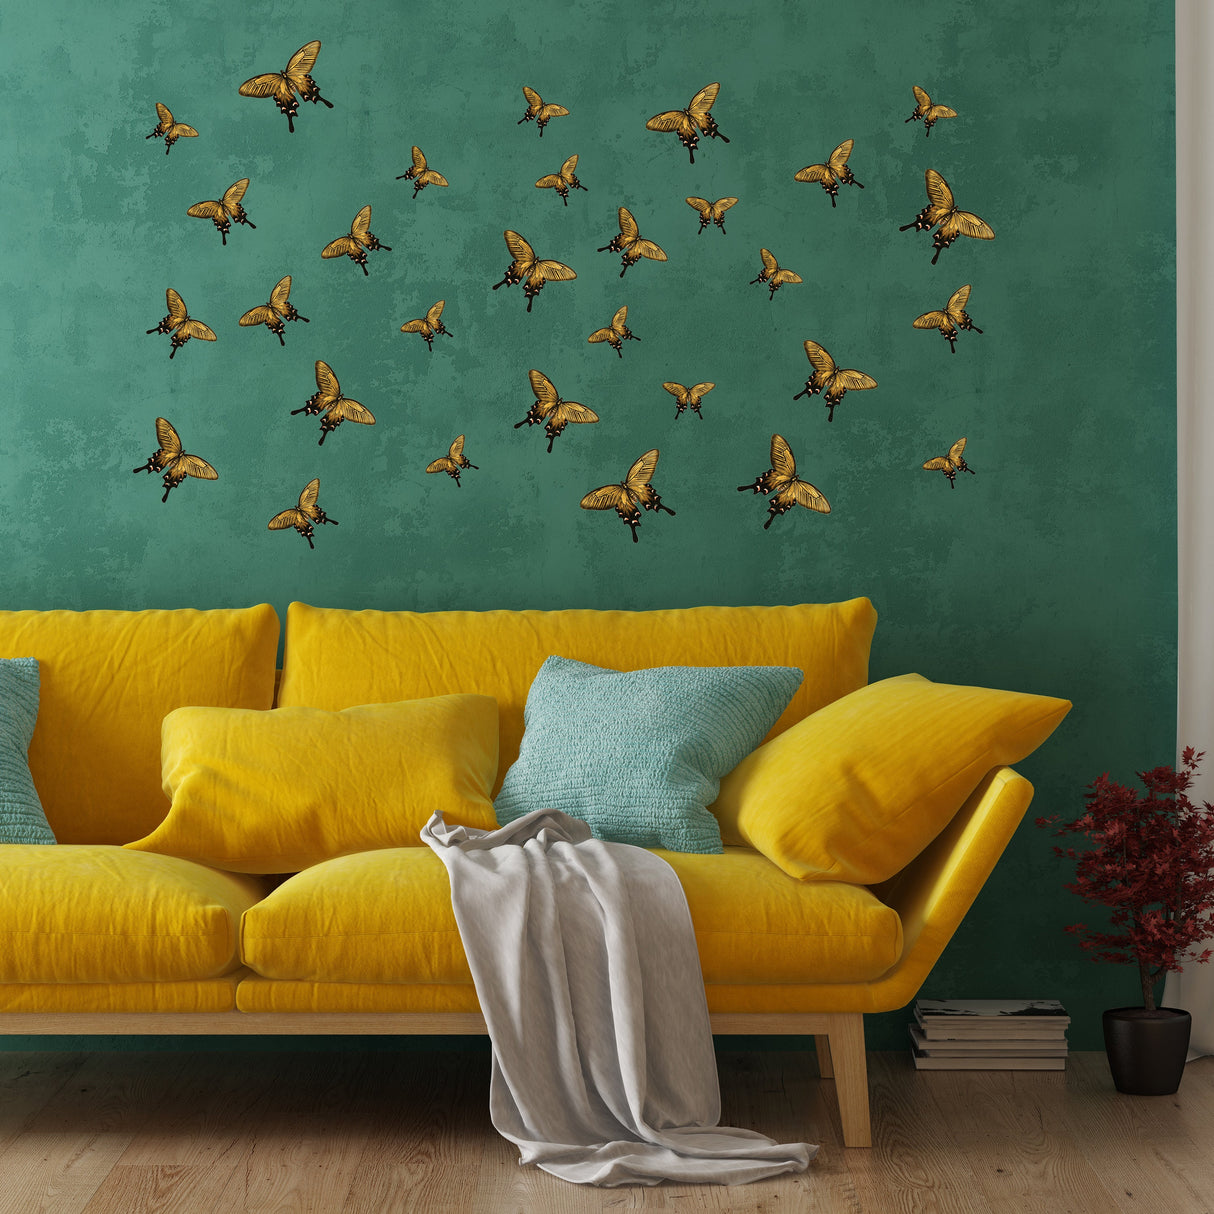 30 Butterfly Wall Decor Stickers - Art Decorations Decals For Girl Room Bedroom